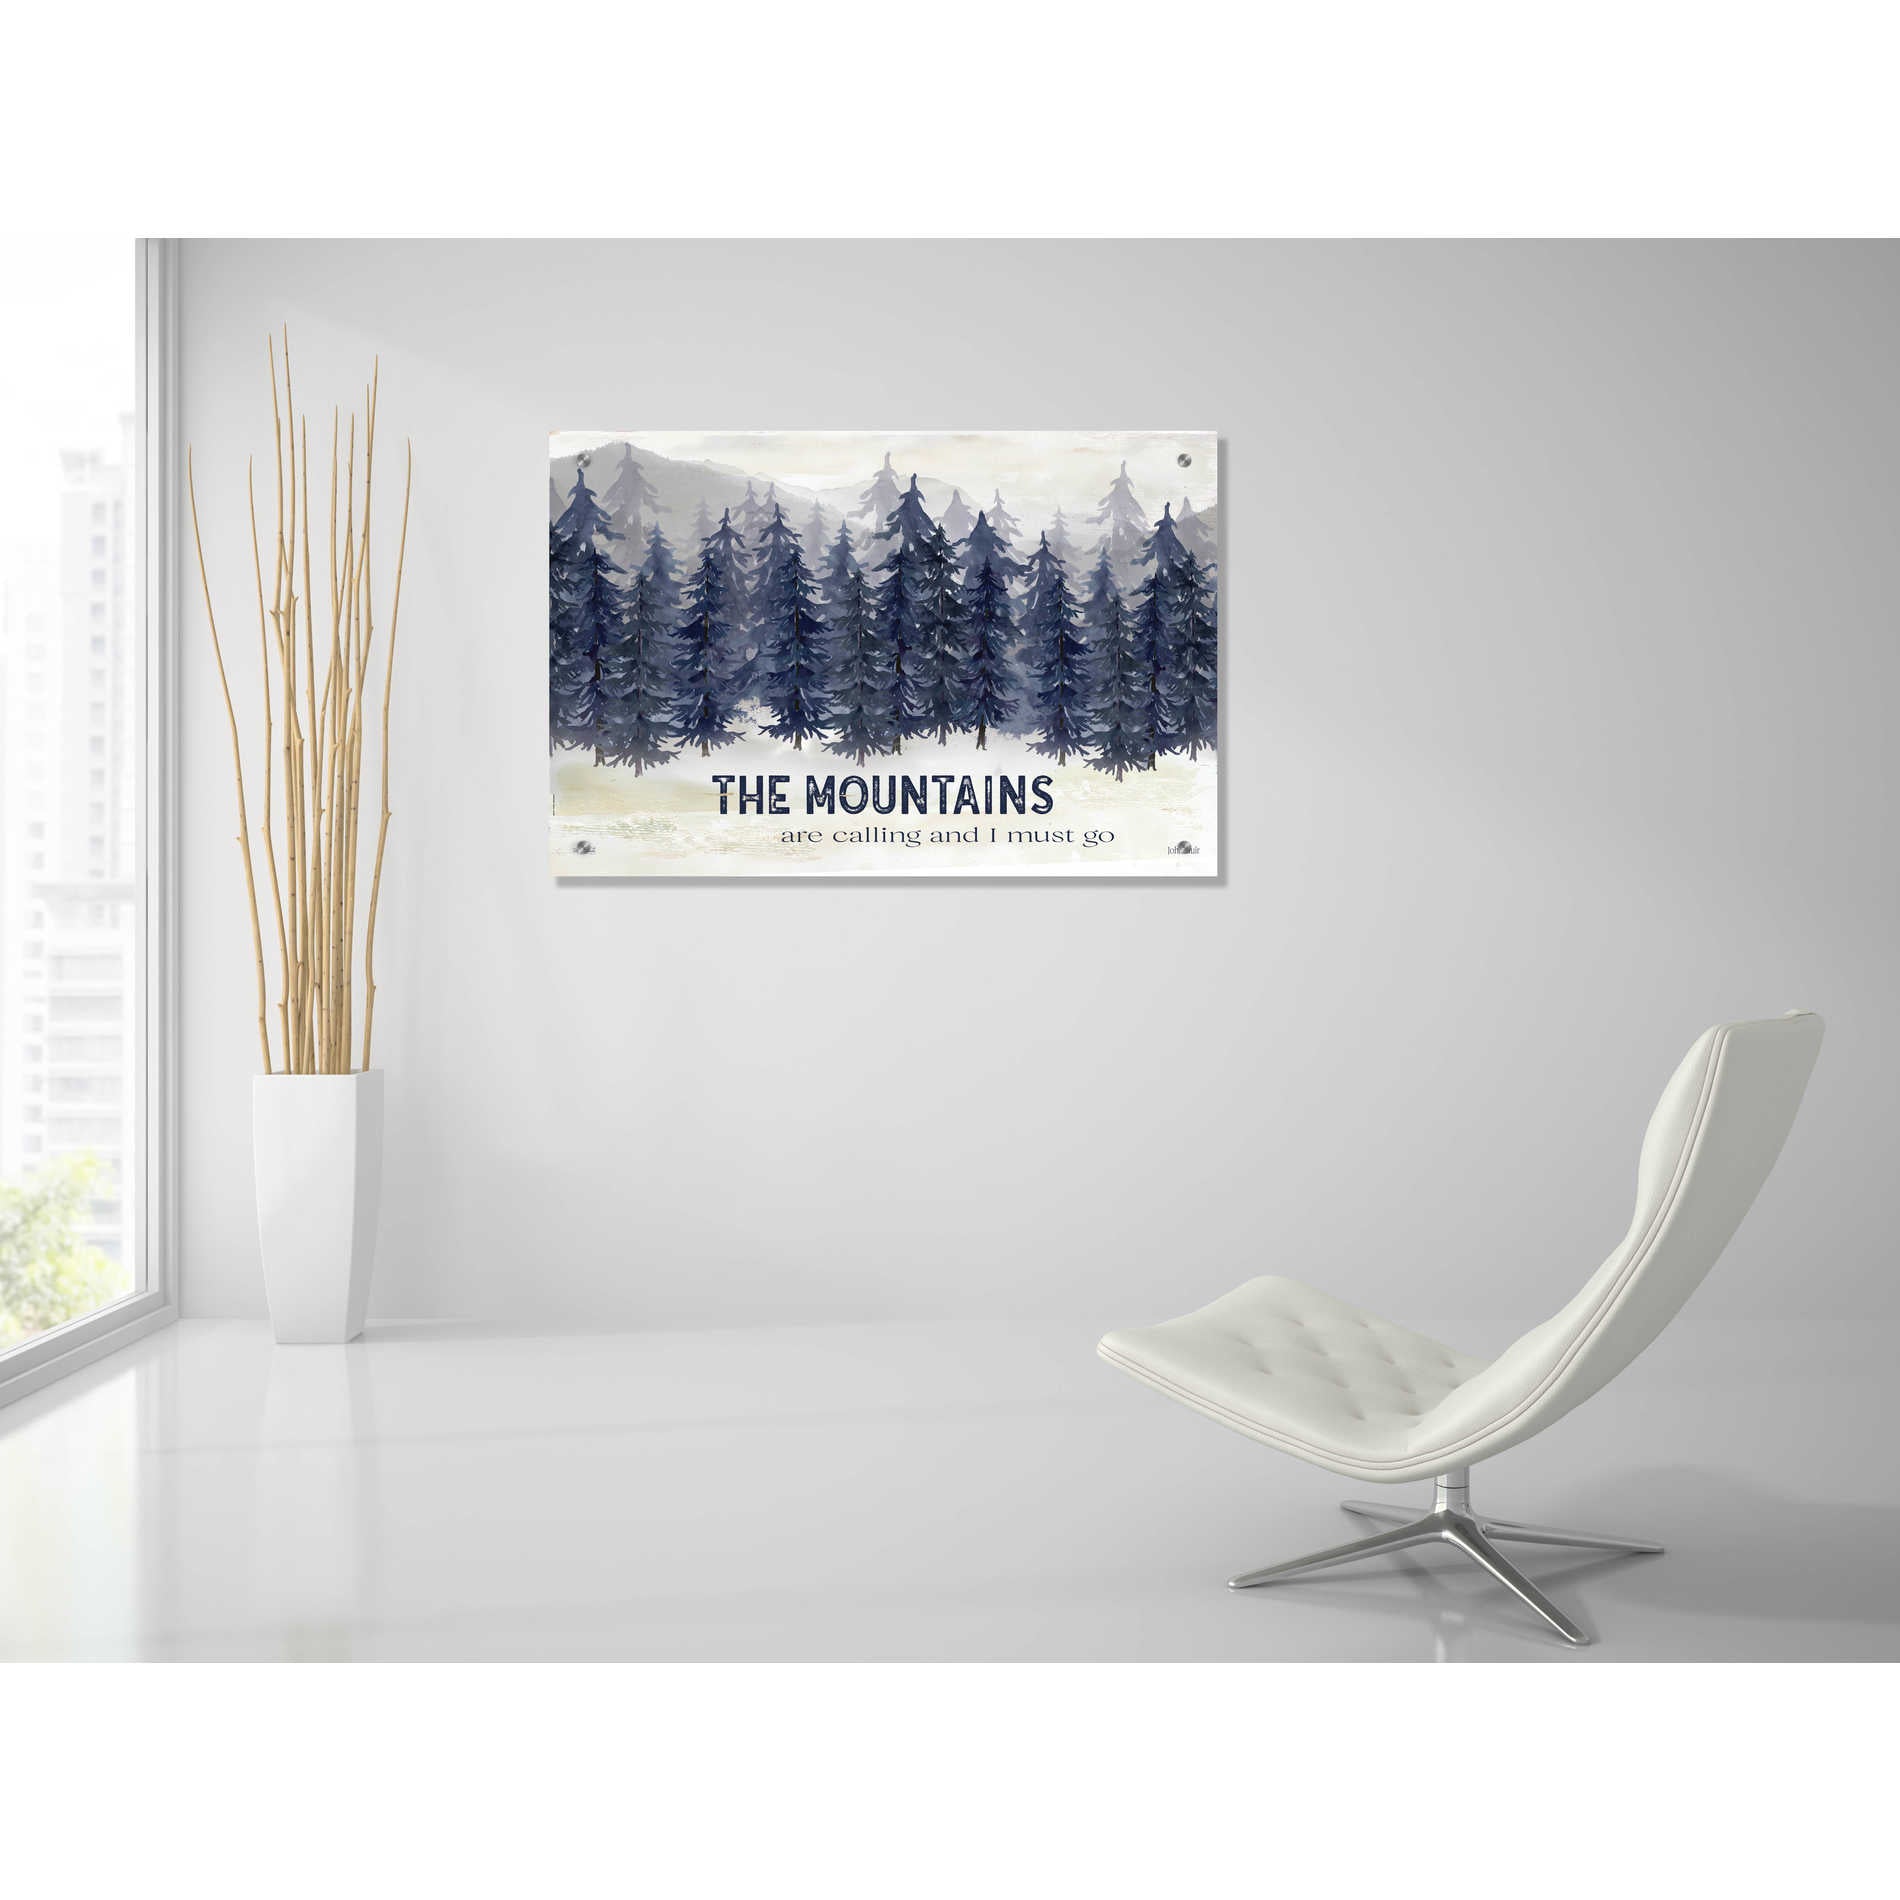 Epic Art 'Navy Trees The Mountains' by Cindy Jacobs, Acrylic Glass Wall Art,36x24